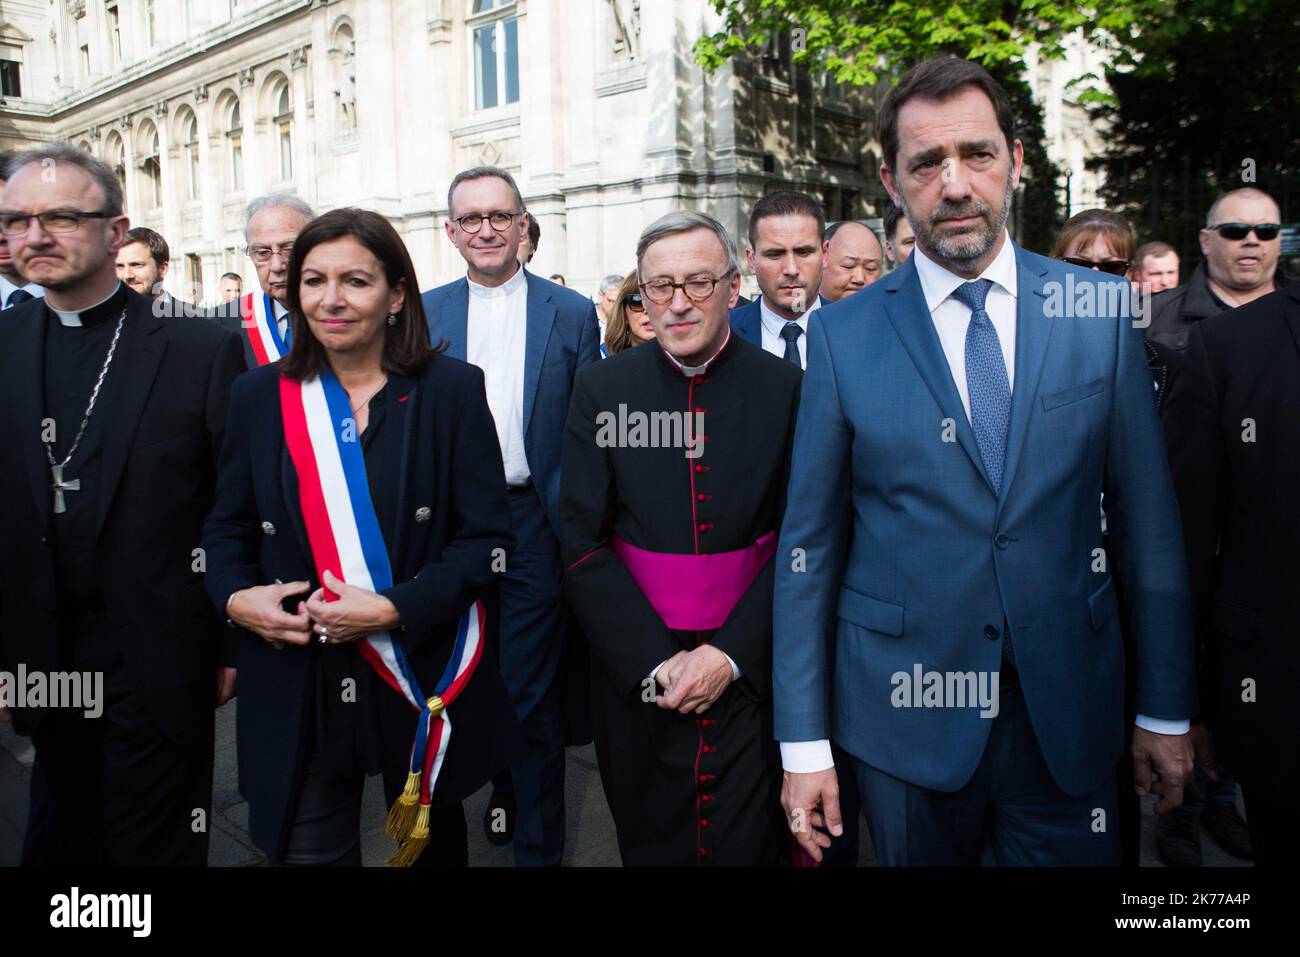 Jean-Marc Chauve, French Interior Minister Christophe Castaner, Paris prefect Didier Lallement, Paris mayor Anne Hidalgo, and other officials walk by Notre Dame cathedral on April 18, 2019 in Paris. France paid a daylong tribute on April 18, 2019 to the Paris firefighters who saved Notre Dame Cathedral from collapse, while construction workers rushed to secure an area above one of the church's famed rose-shaped windows and other vulnerable sections of the fire-damaged landmark  Stock Photo